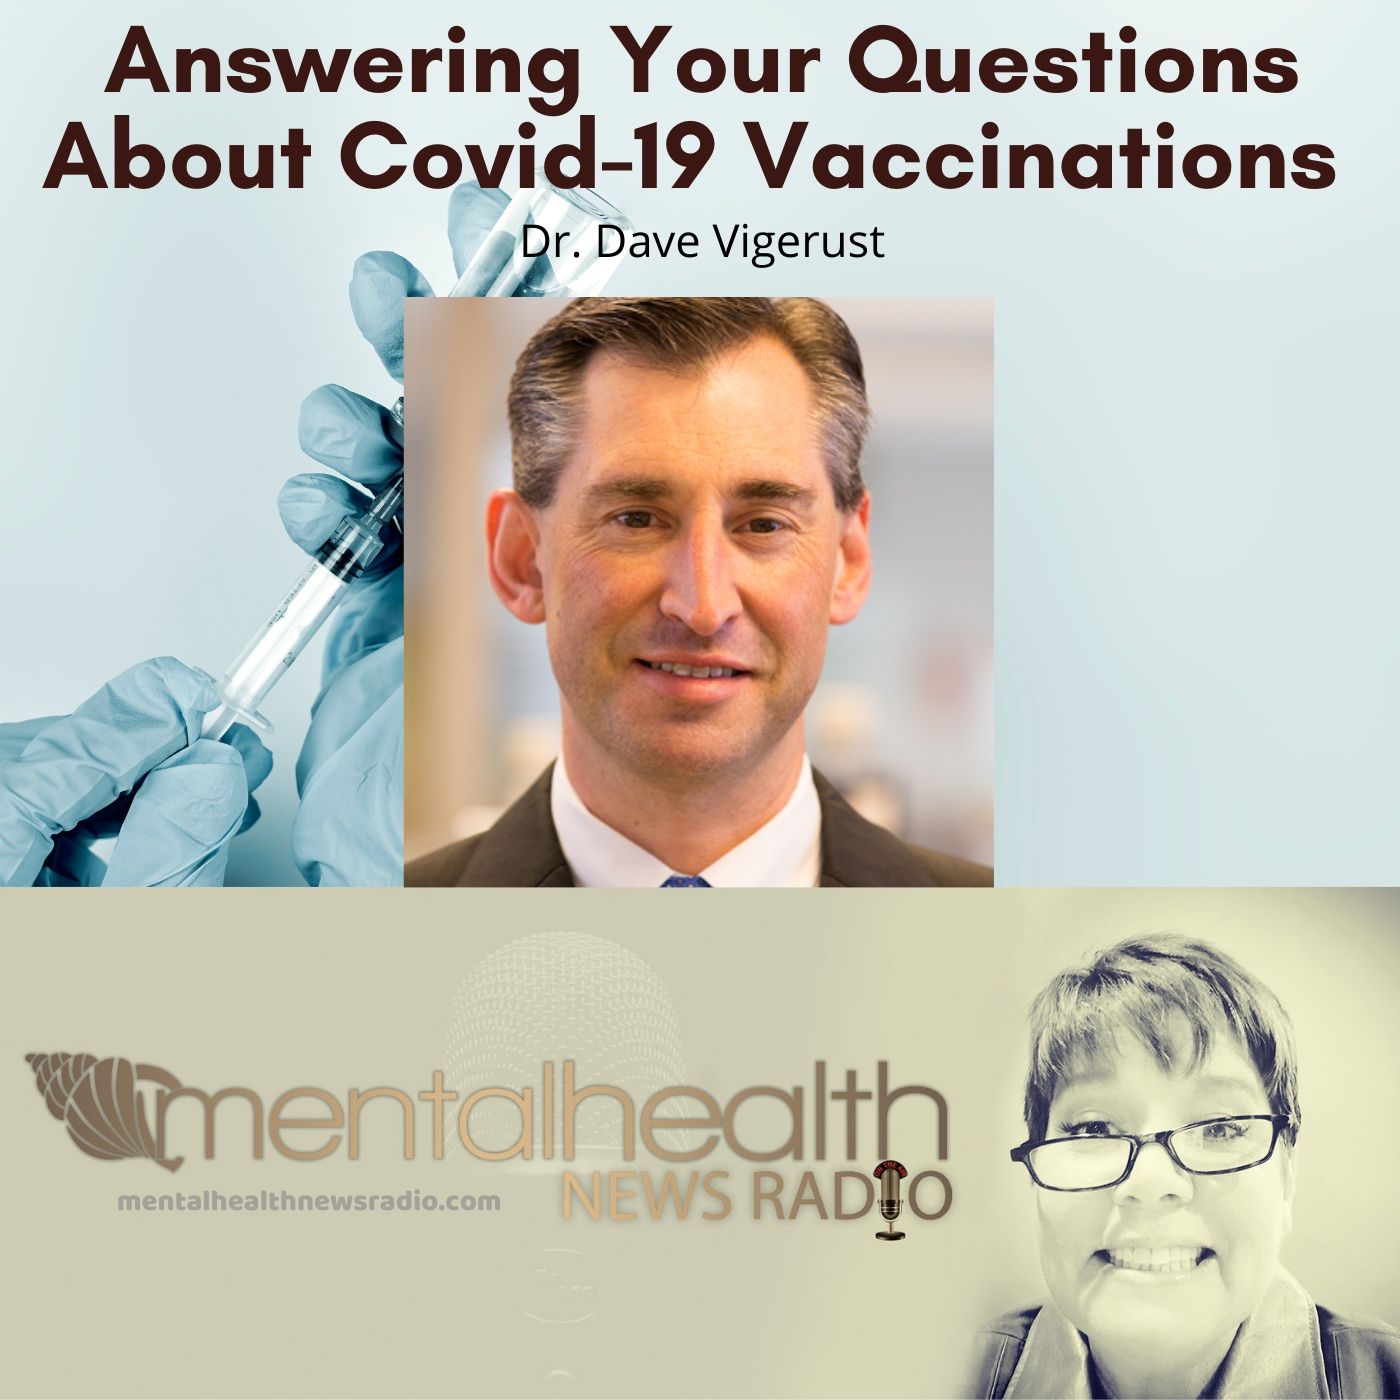 Mental Health News Radio - Answering Your Questions About Covid-19 Vaccinations